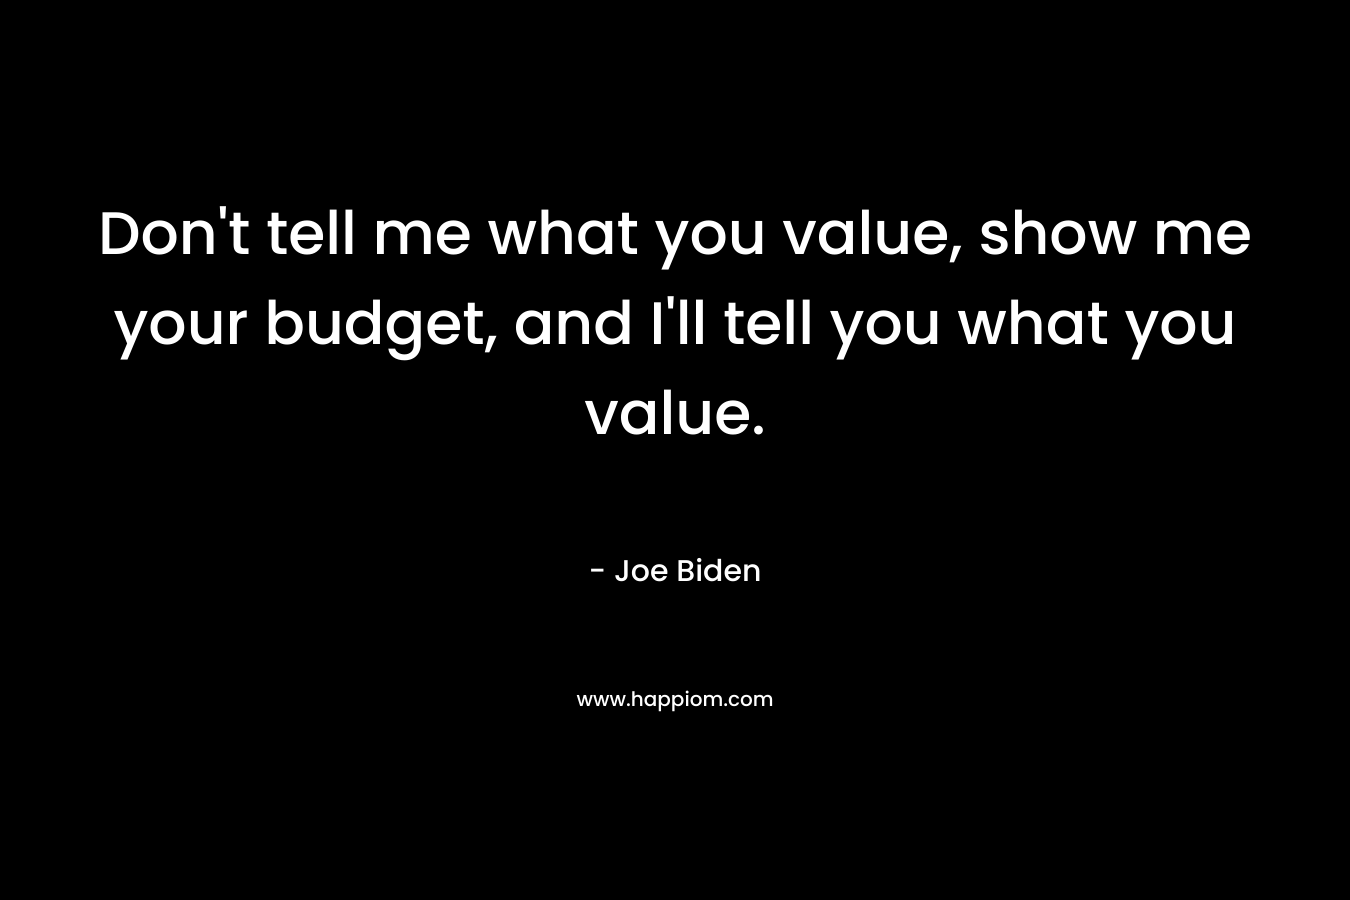 Don't tell me what you value, show me your budget, and I'll tell you what you value.